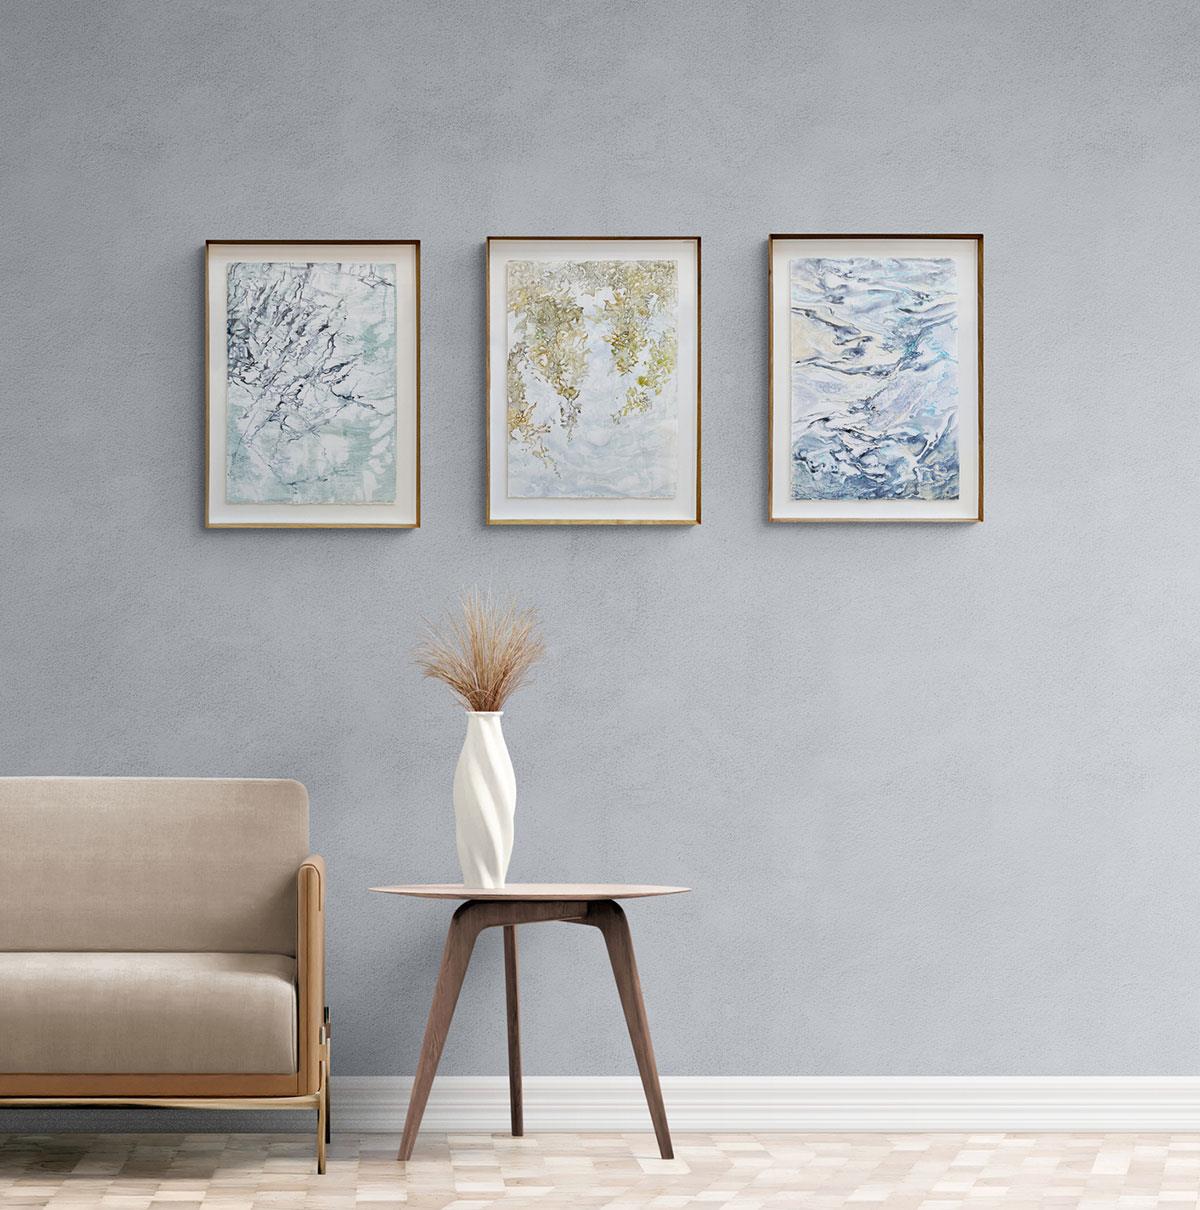 Framed abstract watercolour artwork on paper in shades of blue and yellow